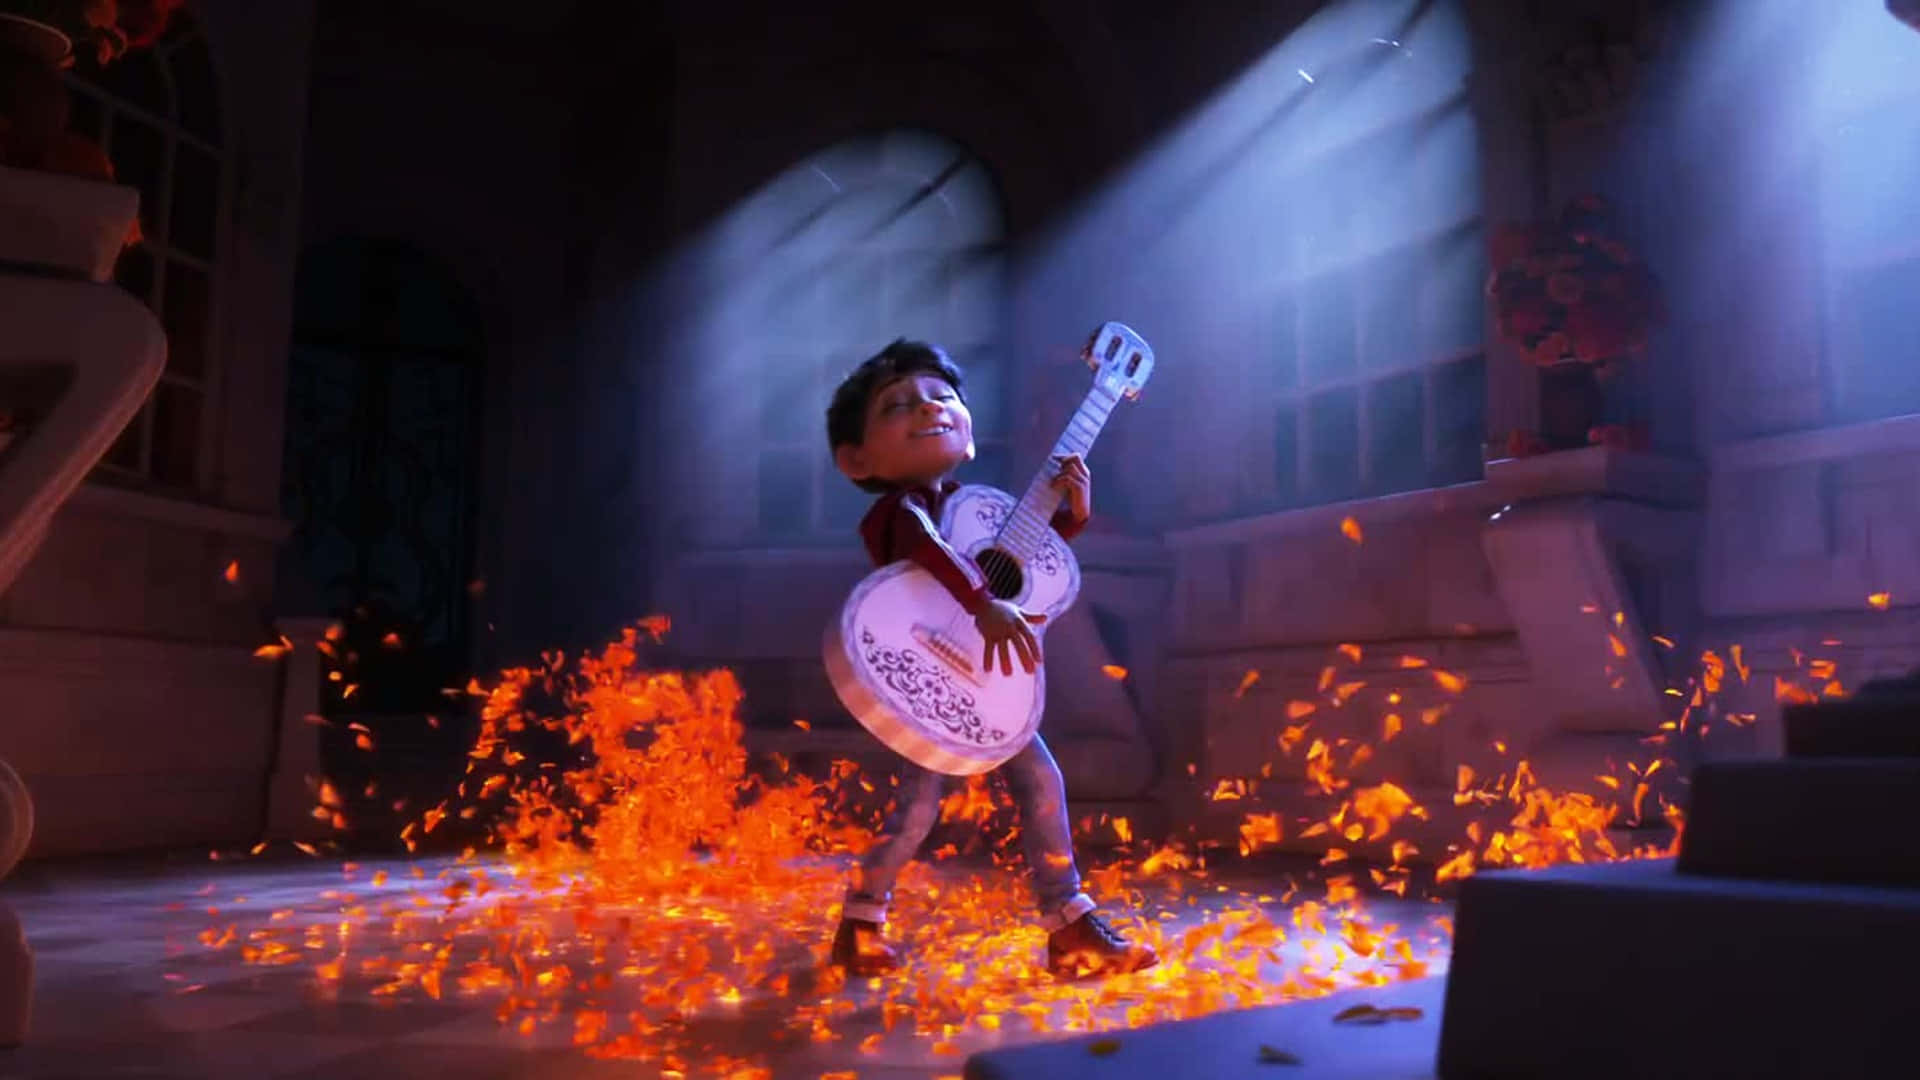 Explore the ancient mysteries of Latin America in the award-winning animated movie ‘Coco’